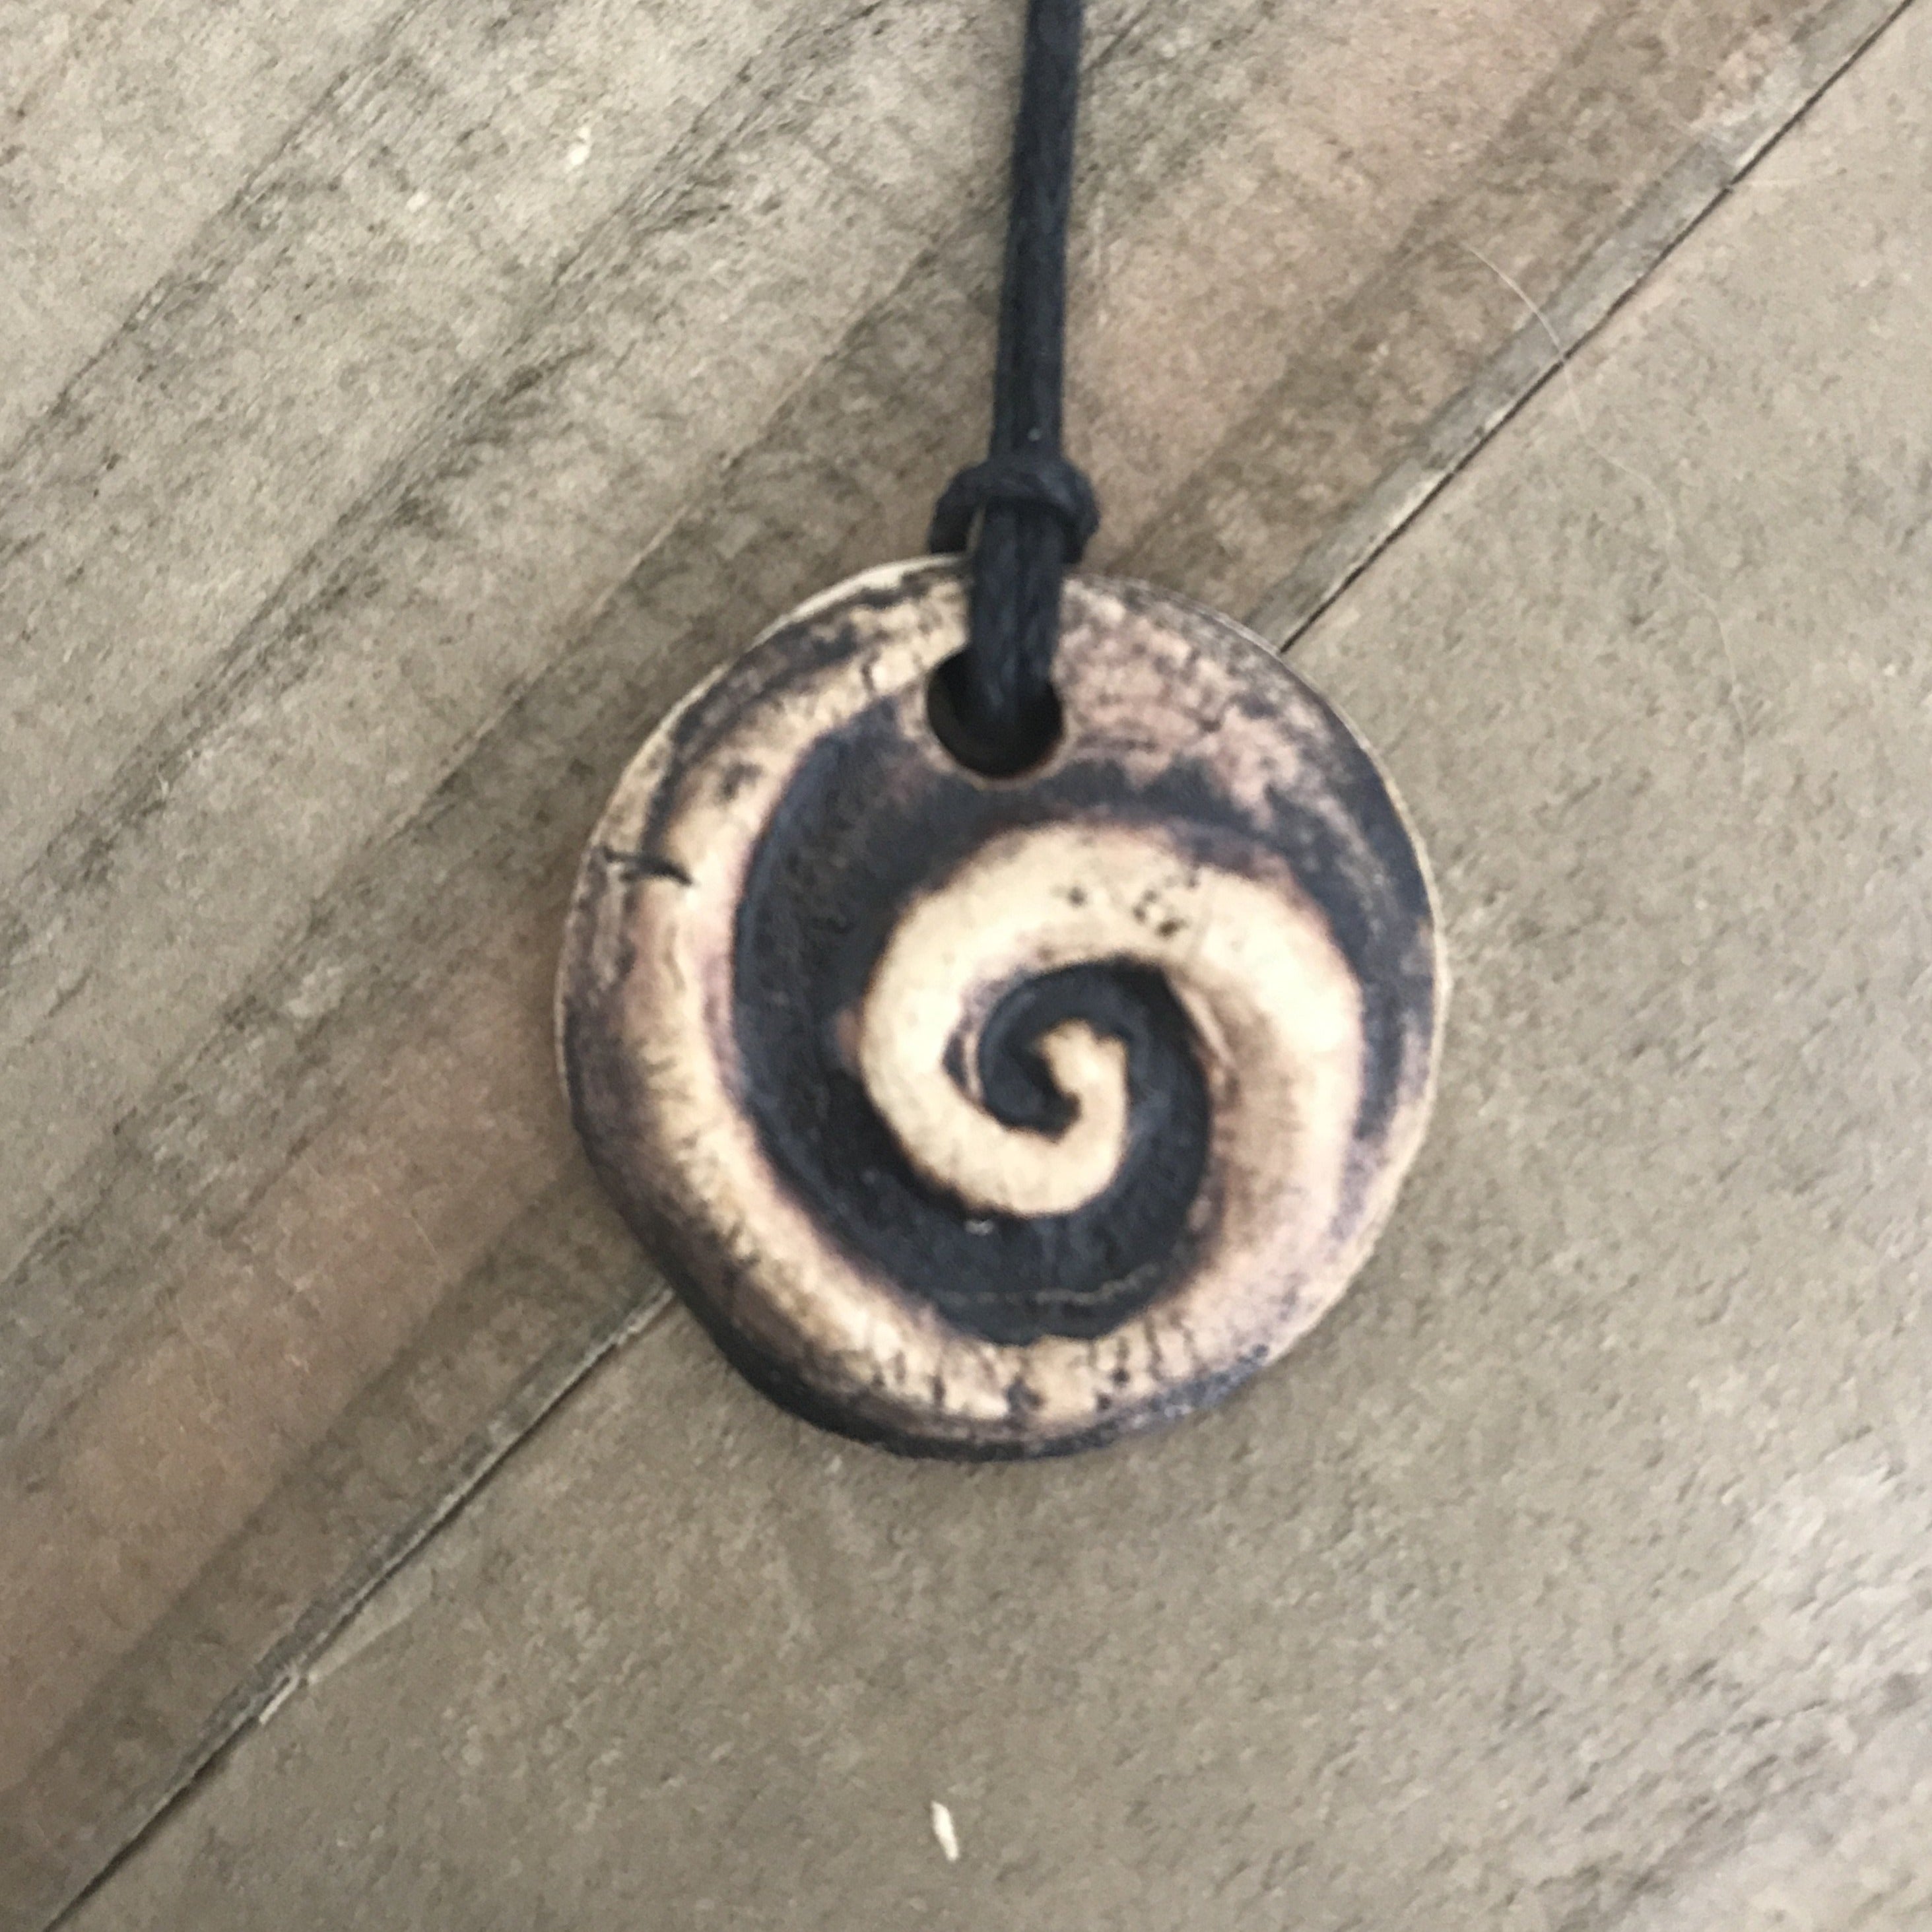 Round pendant necklace with koru spiral. Made of clay, brown color.